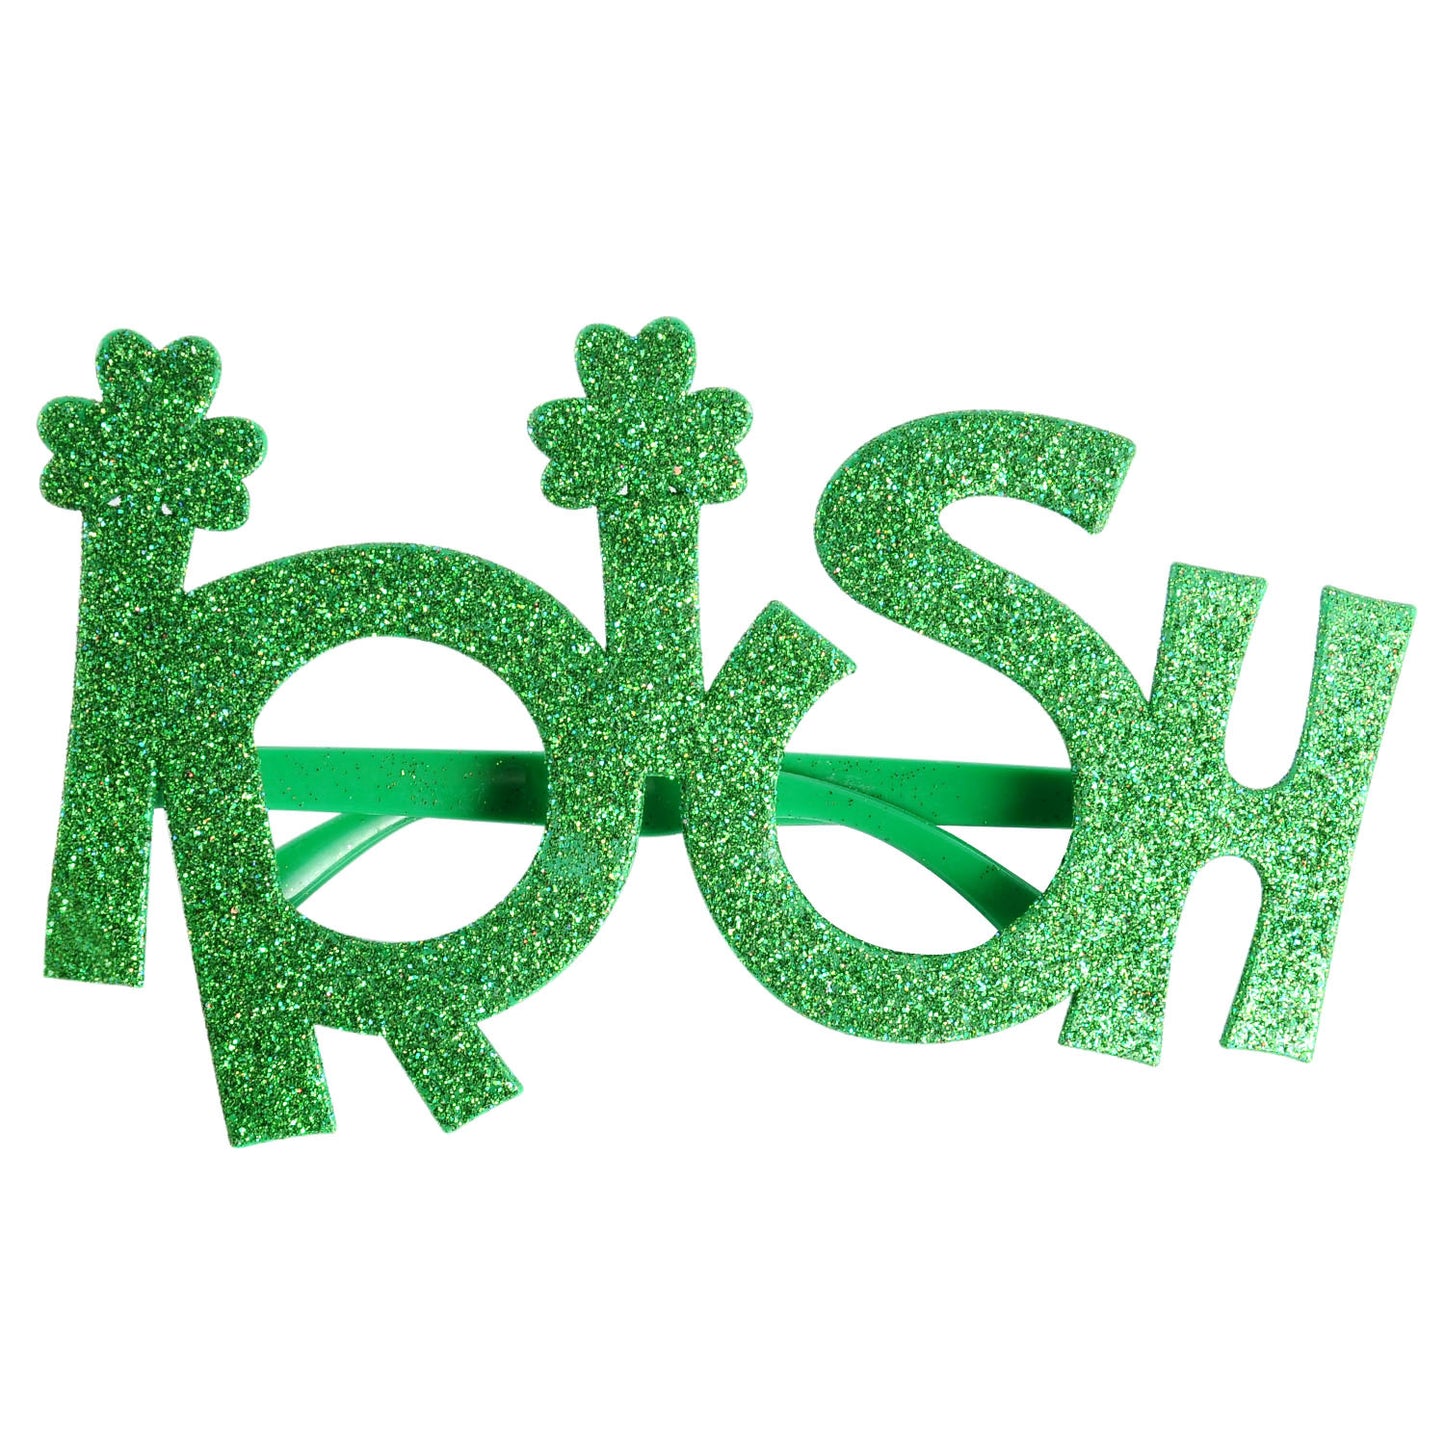 St. Patrick's Day Party Glasses Irish Holiday Supplies Photo Prop Dress Up Funny Glasses